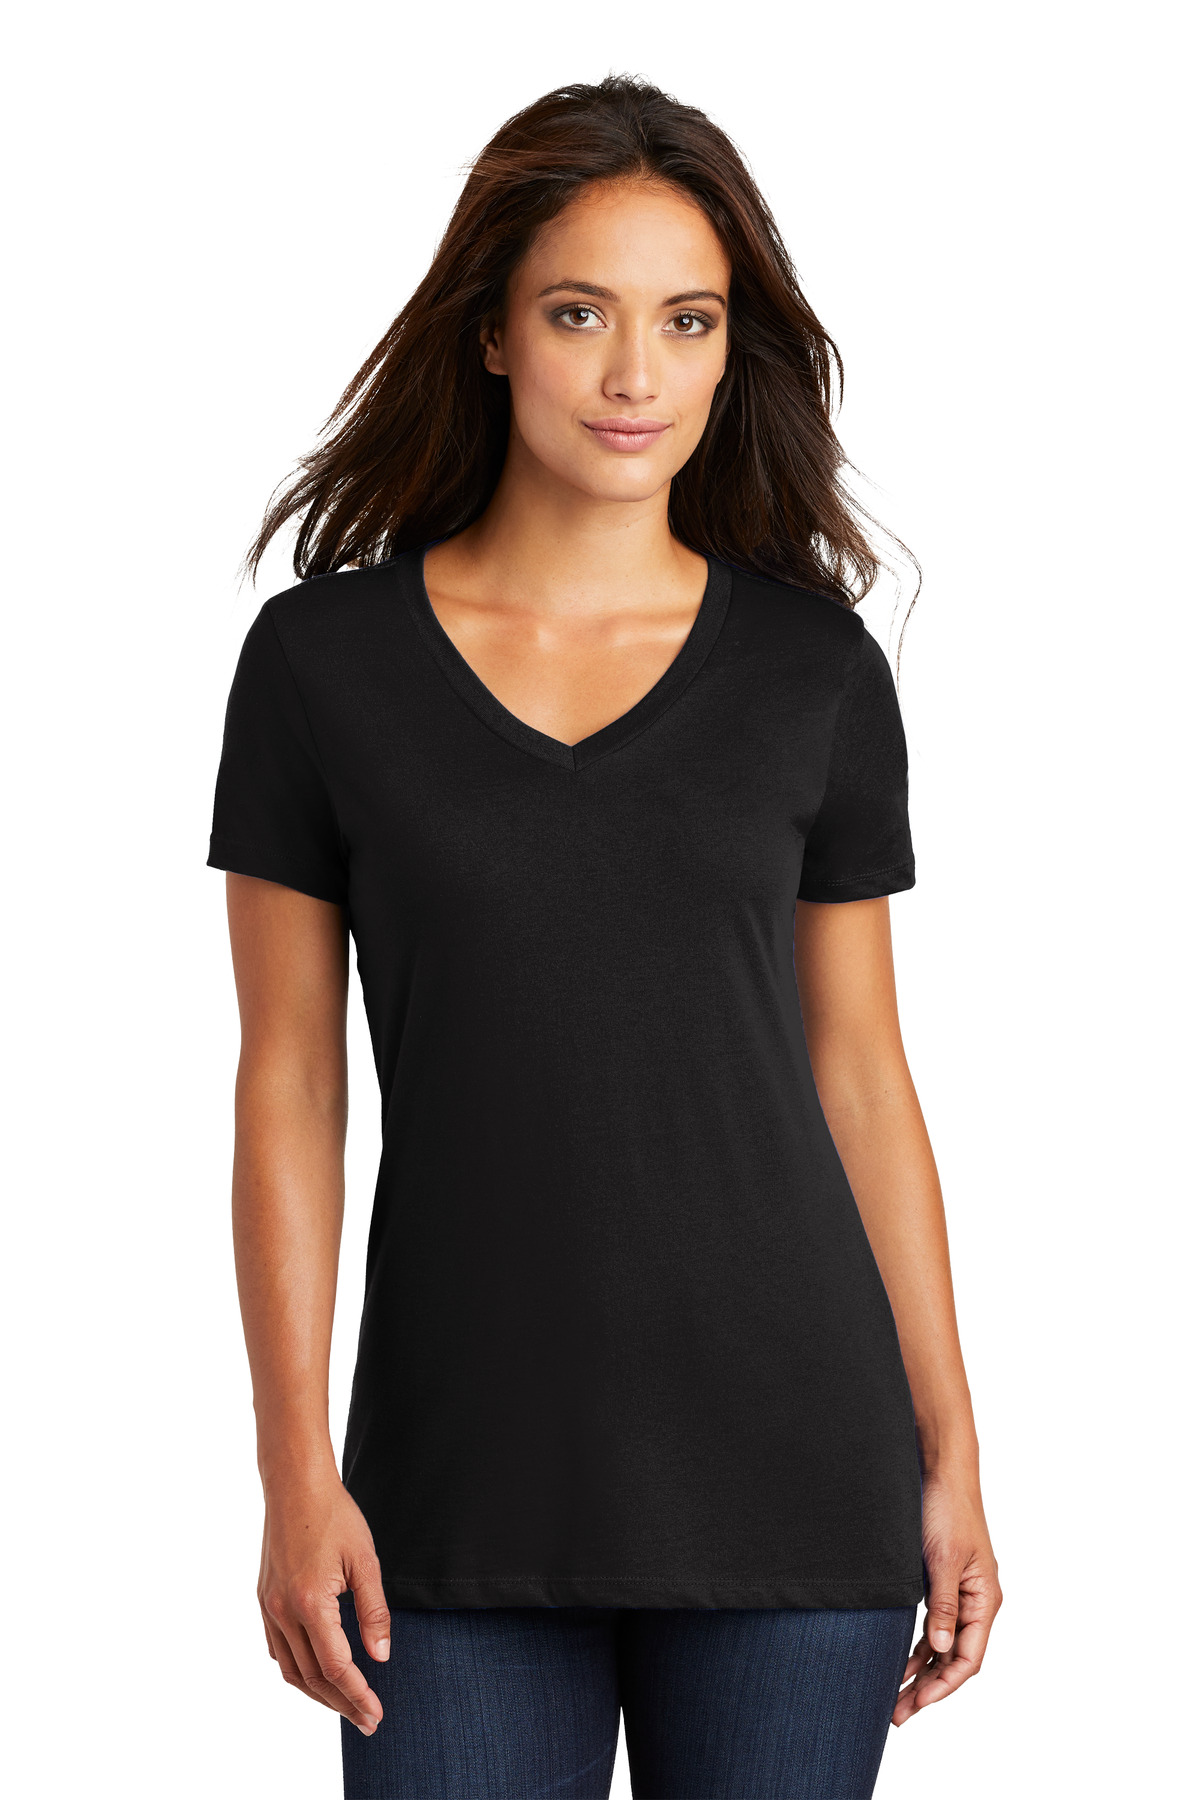 District - Women''s Perfect Weight V-Neck Tee. DM1170L